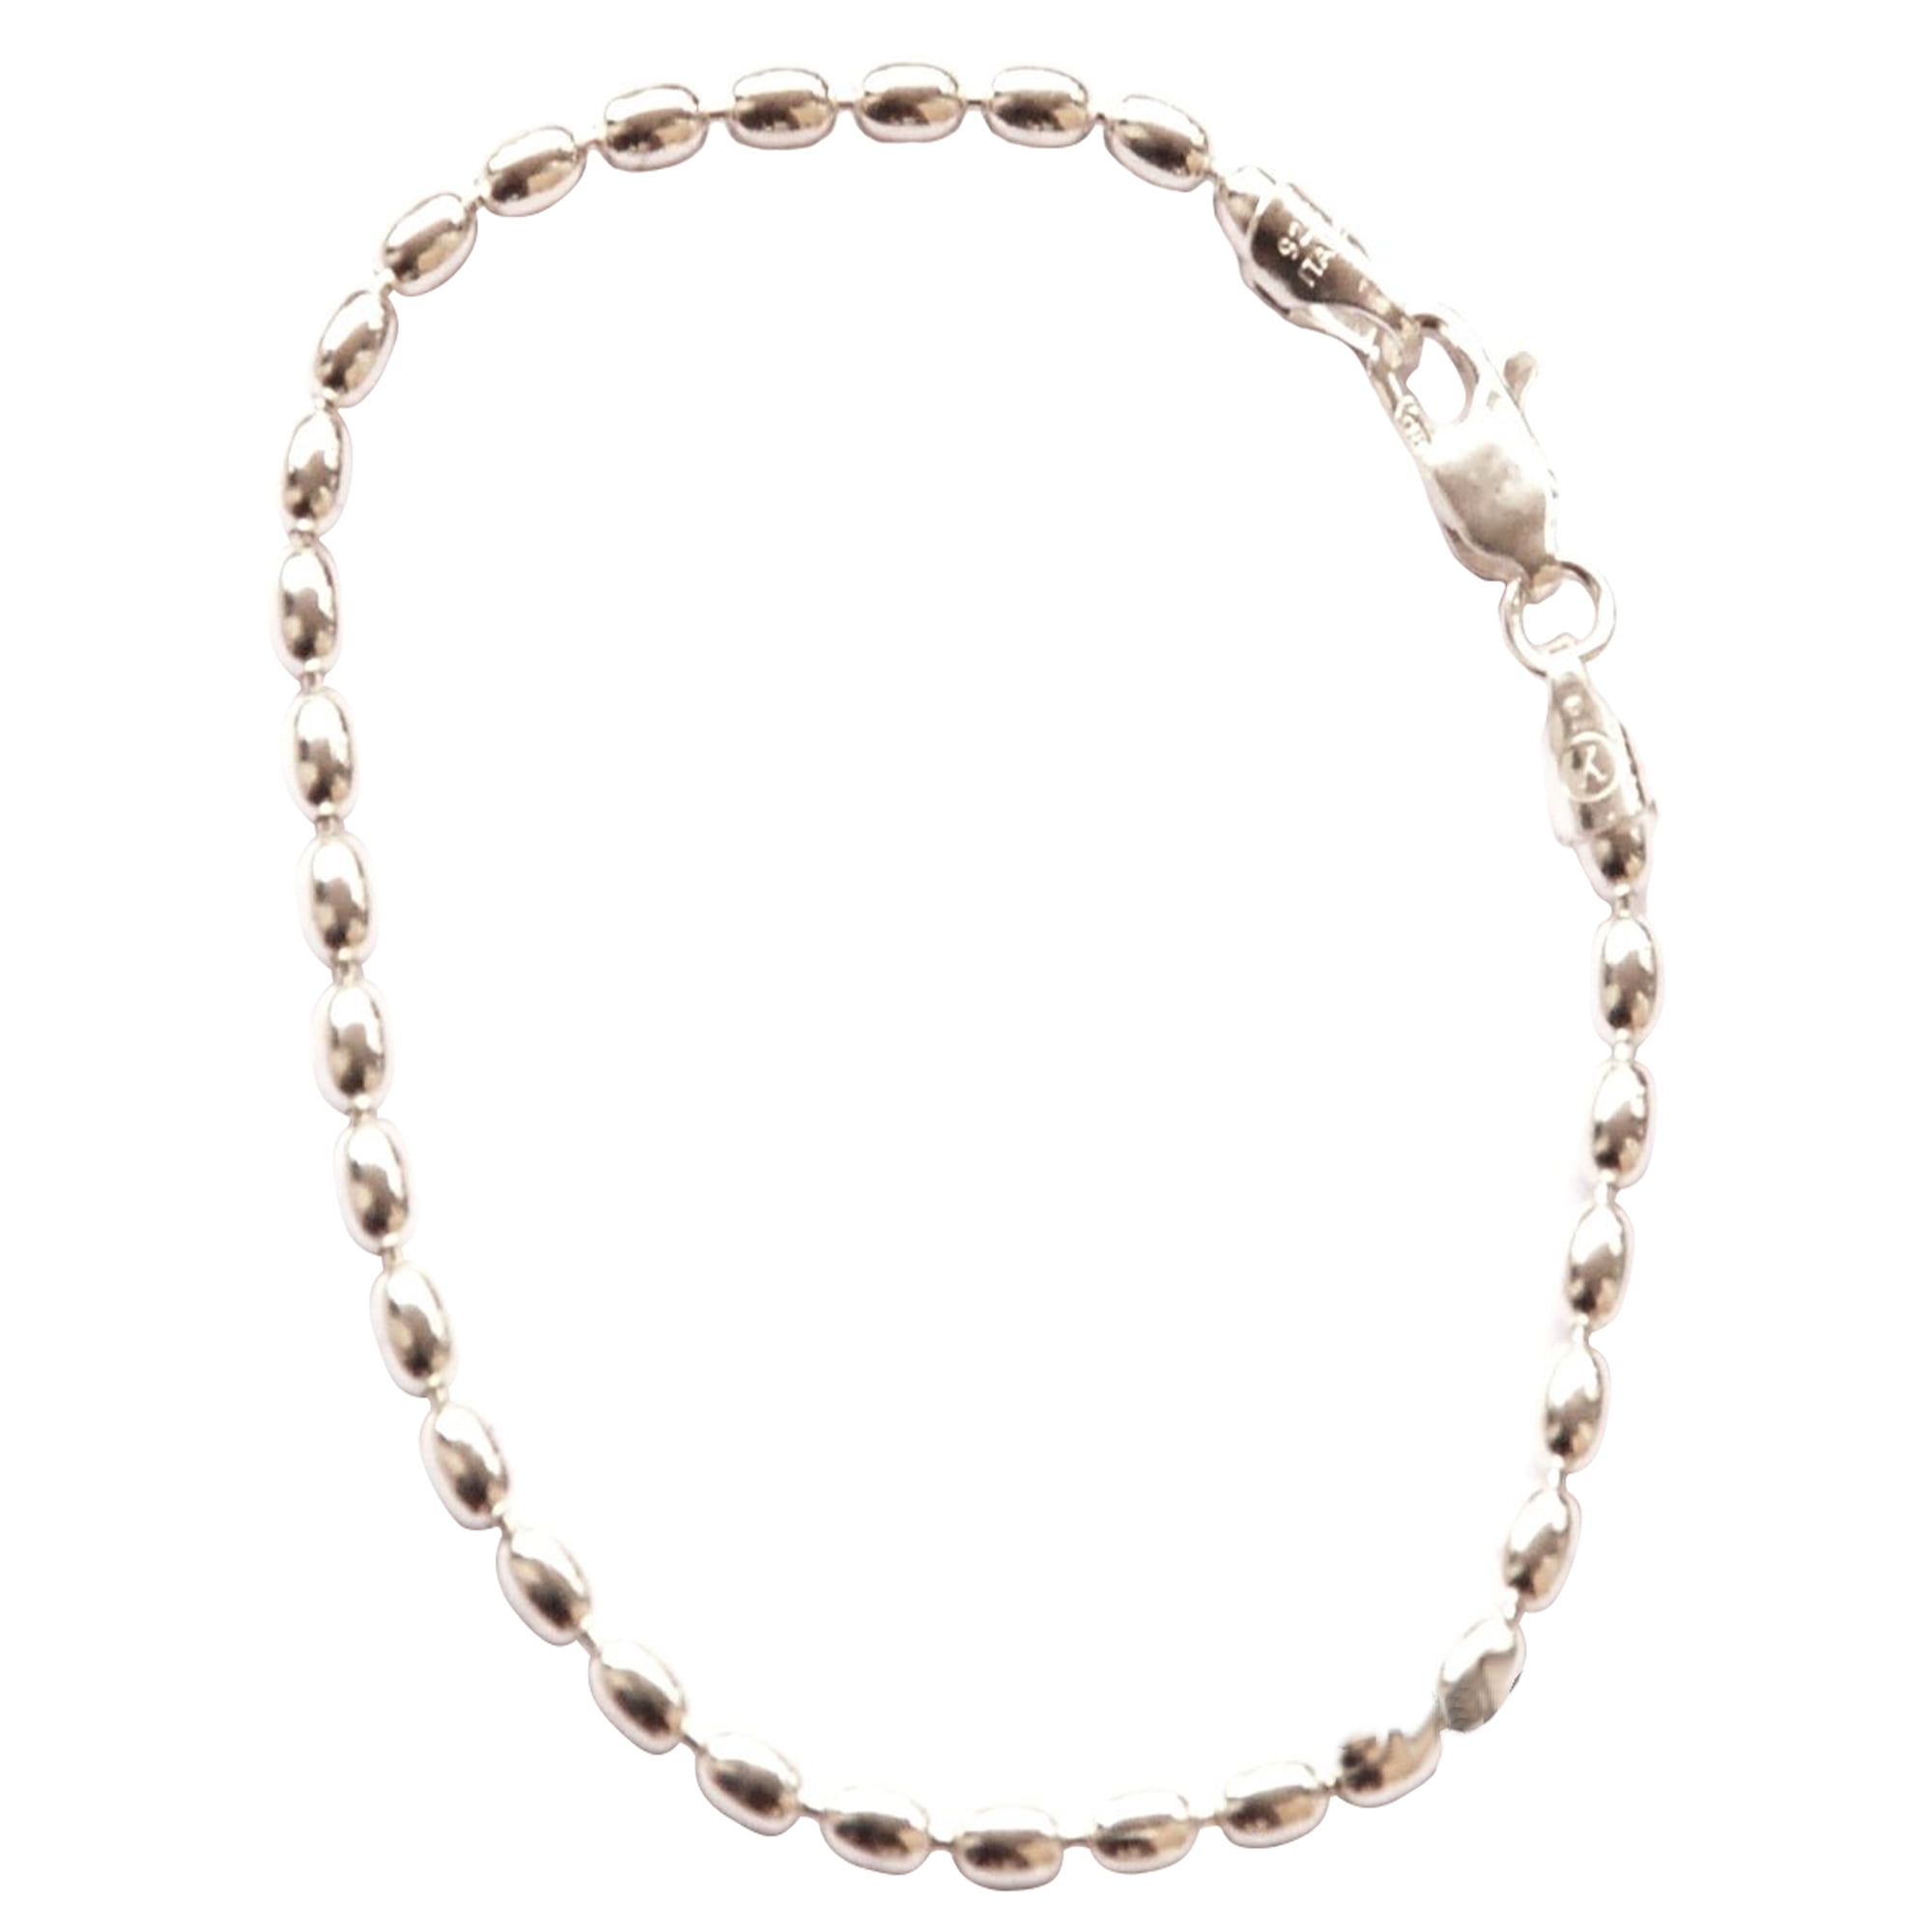 Solid 925 Sterling Silver Italian Oval Bead Rice Bead Chain Necklace or  Bracelet